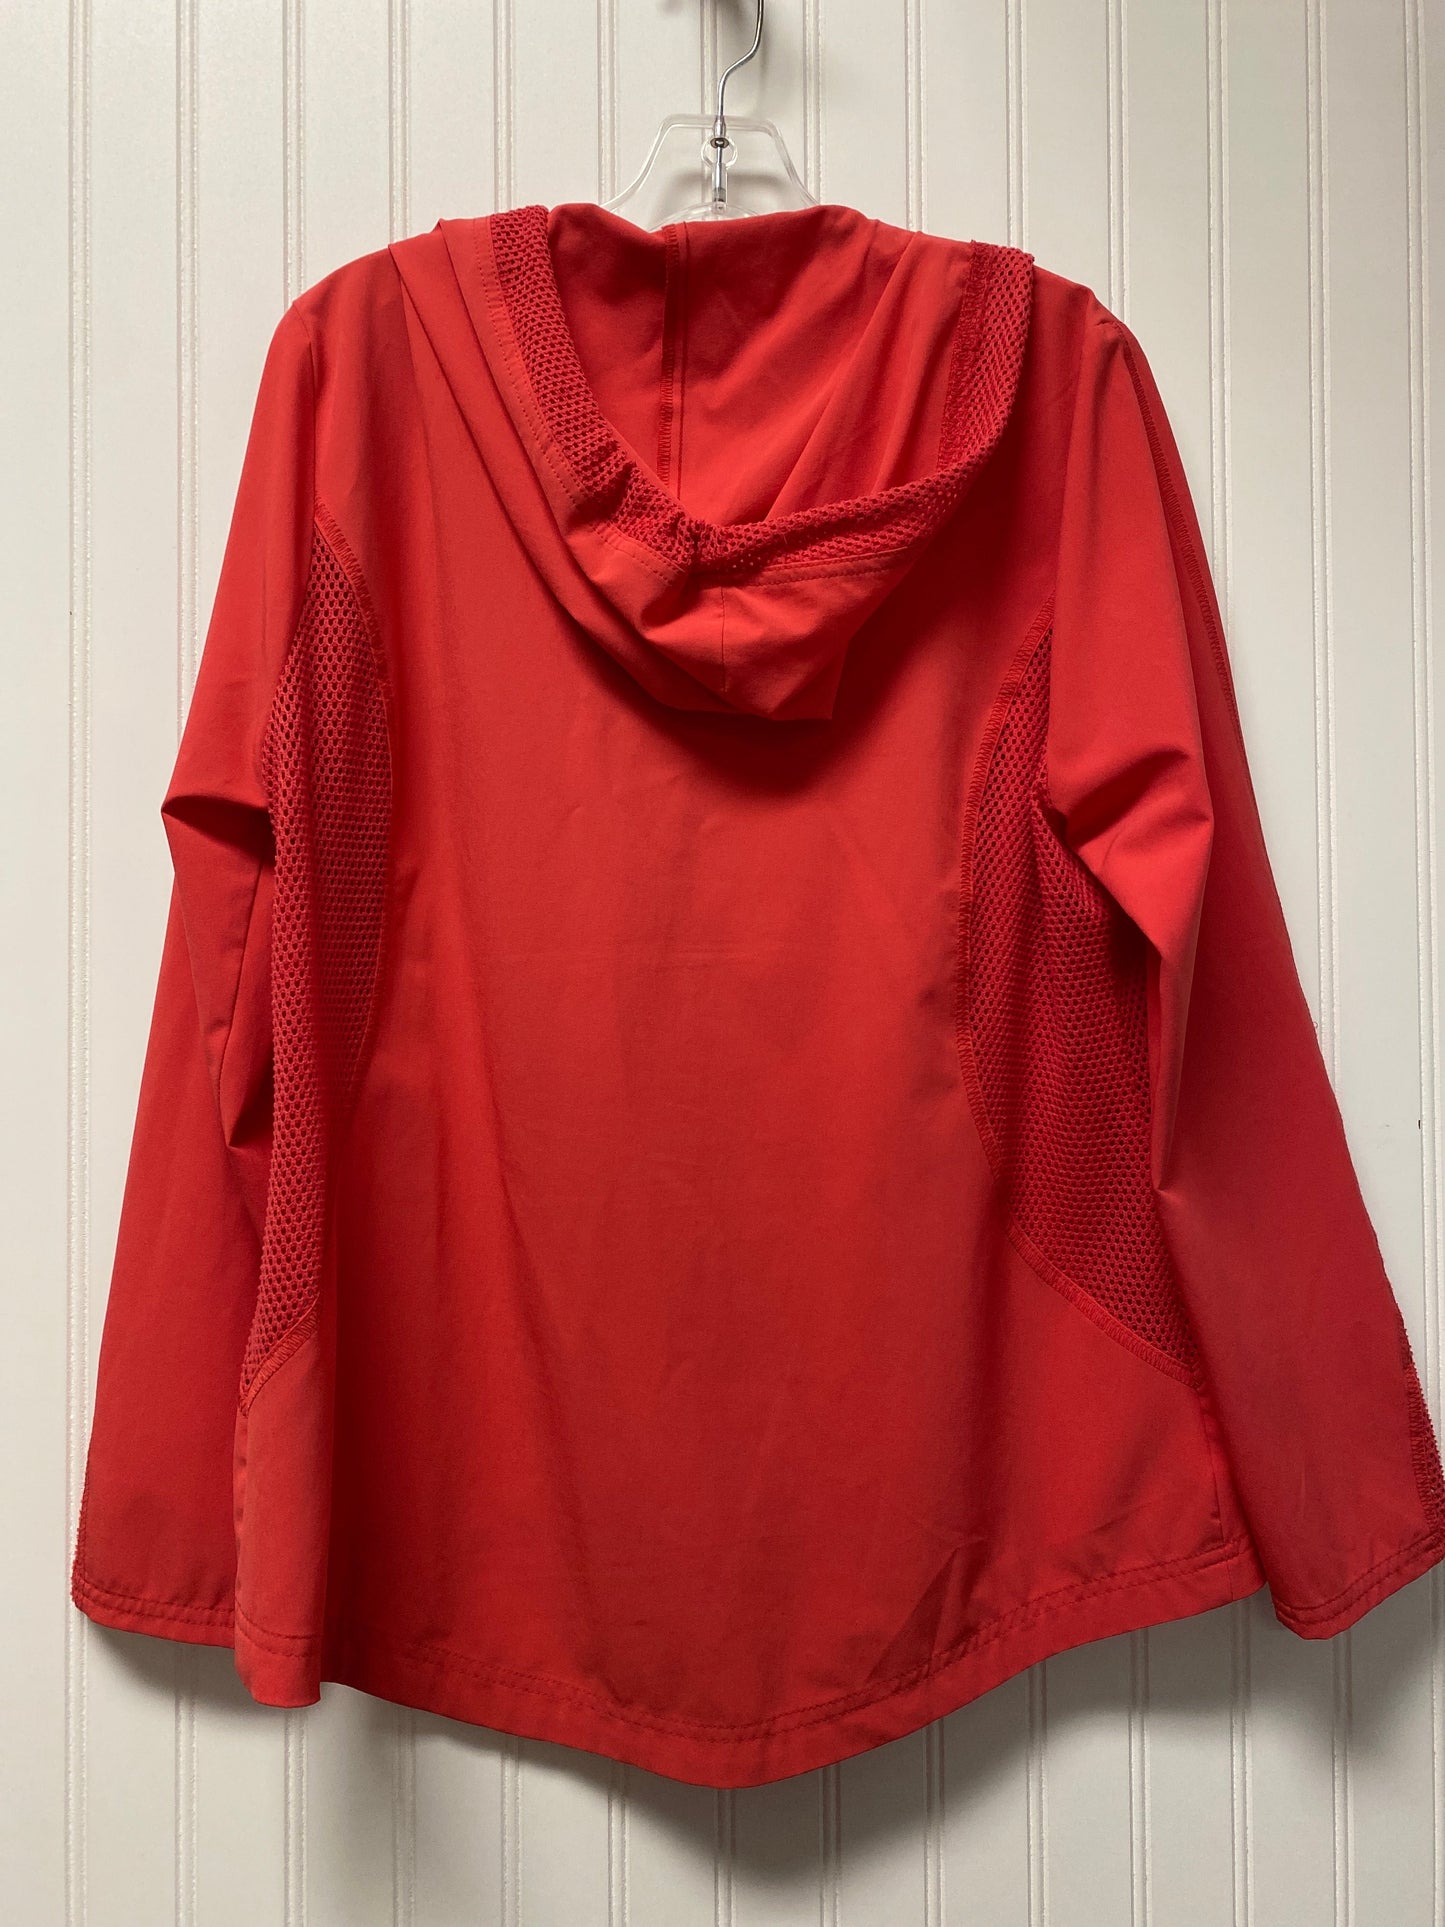 Red Athletic Jacket Chicos, Size Xl